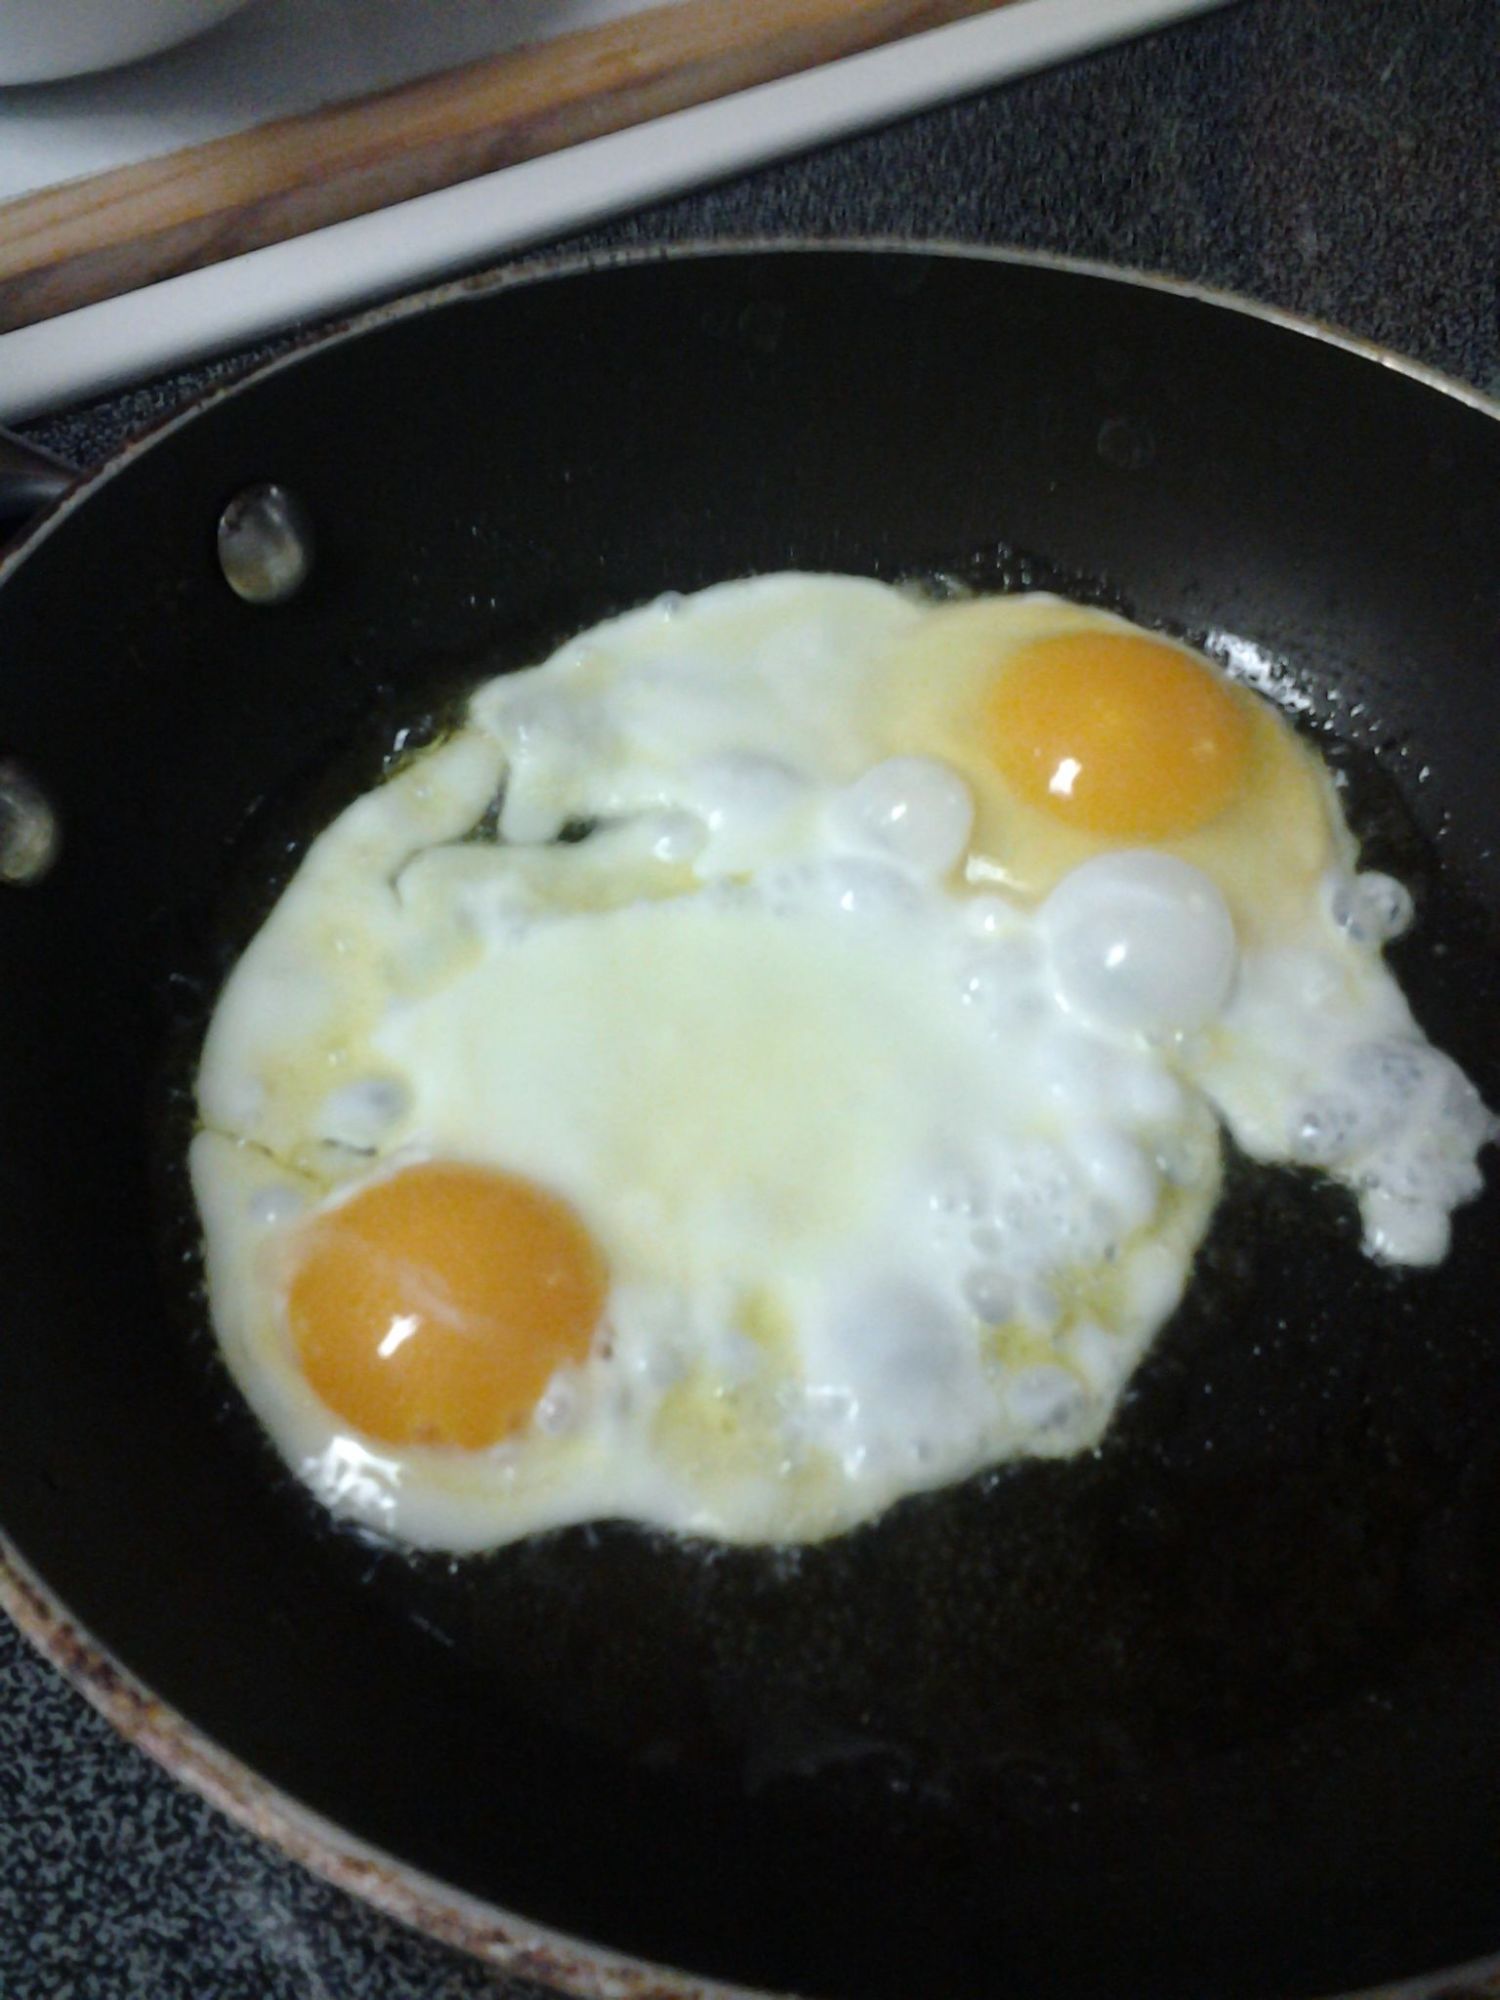 First two eggs for breakfast. So yummy!